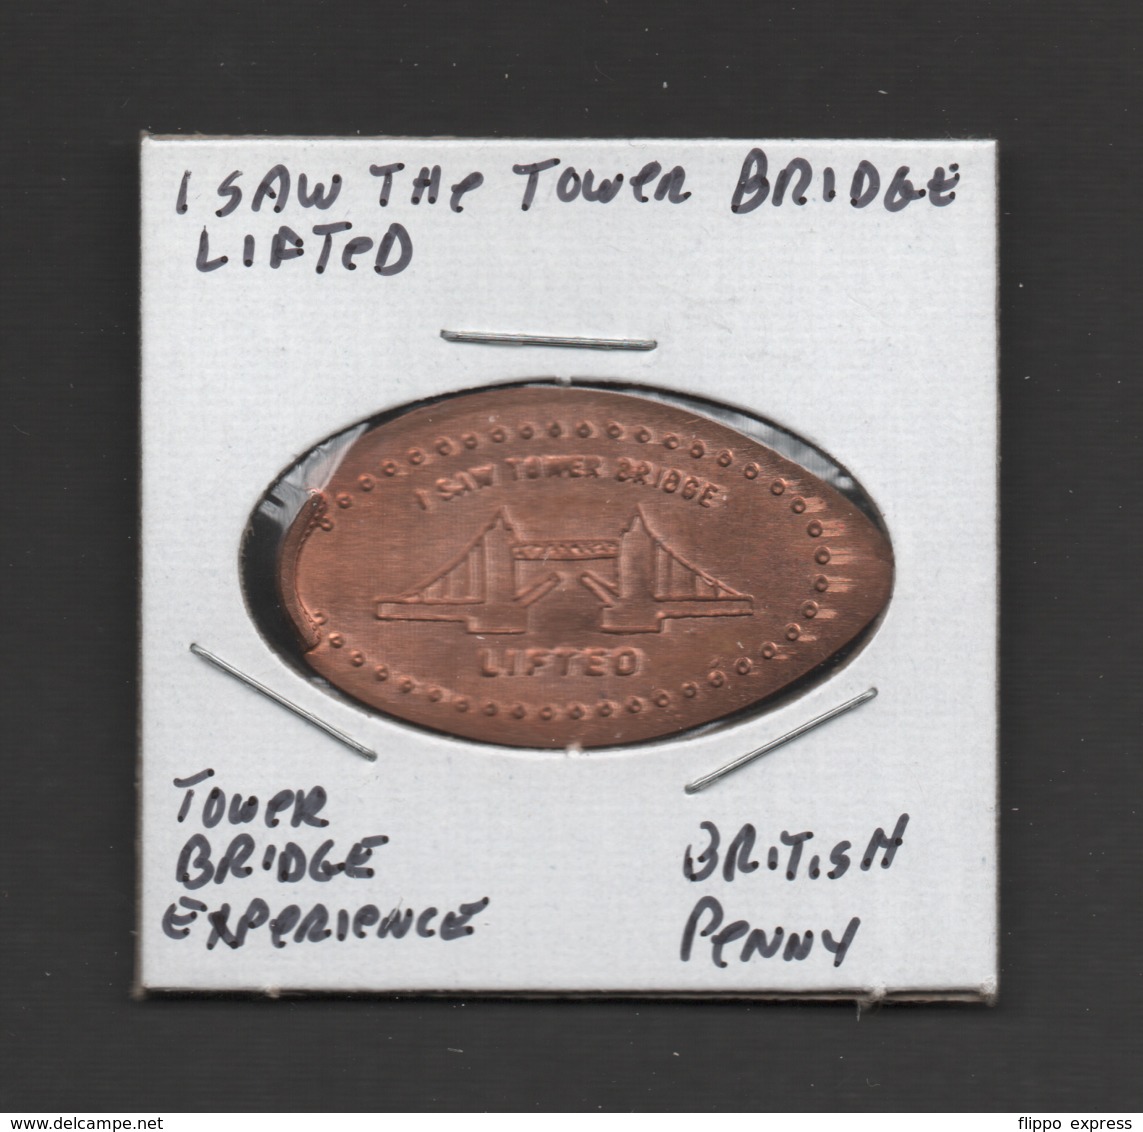 Pressed Penny, Elongated Coin, I Saw The Tower Bridge Lifted, London, England - Pièces écrasées (Elongated Coins)